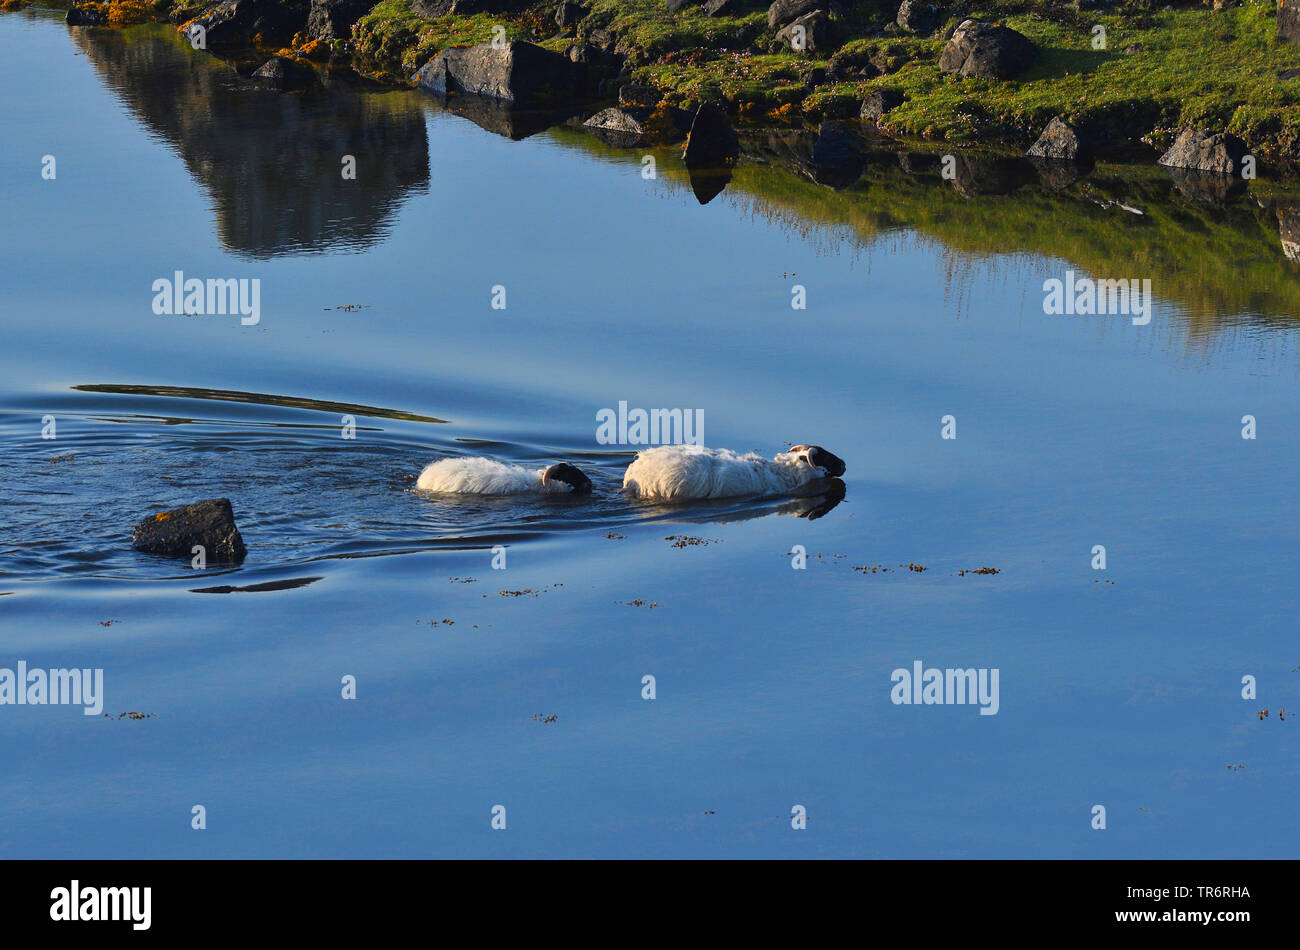 domestic sheep (Ovis ammon f. aries), two sheep crossing a stretch of water, United Kingdom, Scotland, Cheese Bay Stock Photo